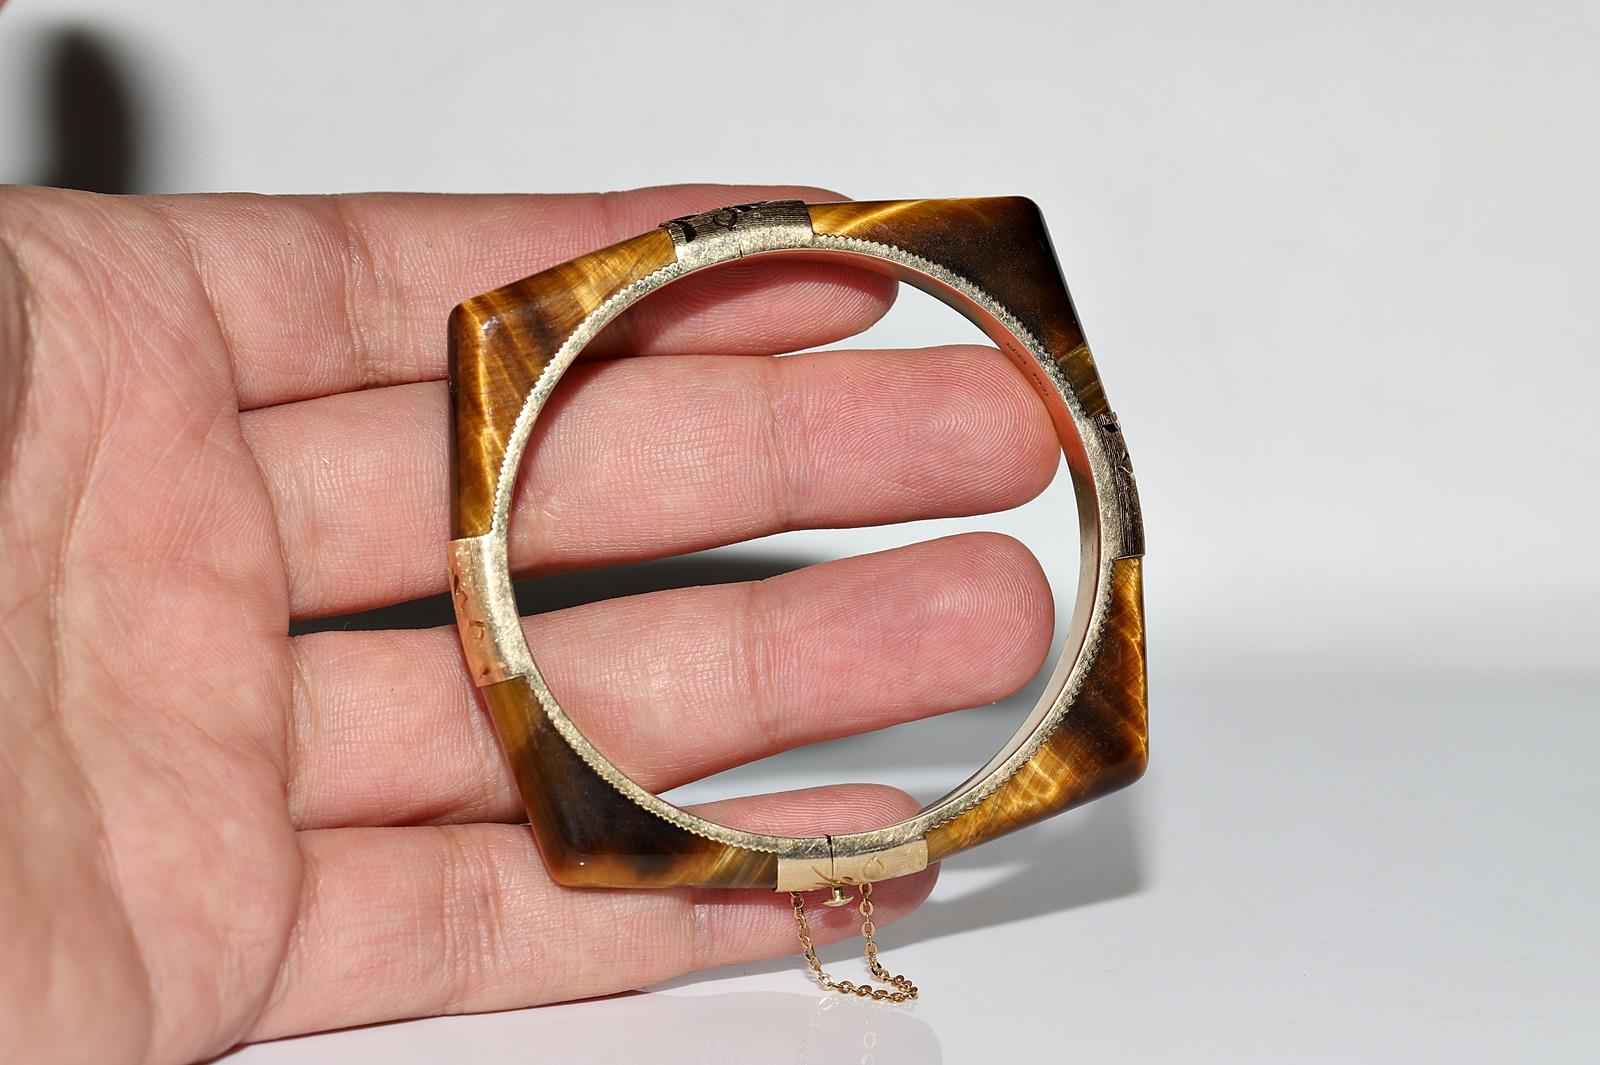 Vintage Circa 1960s 14k Gold Natural Tiger Eyes Decorated Bangle Bracelet

In very good condition.
Total weight is 32.7 grams.
Please contact for any questions.